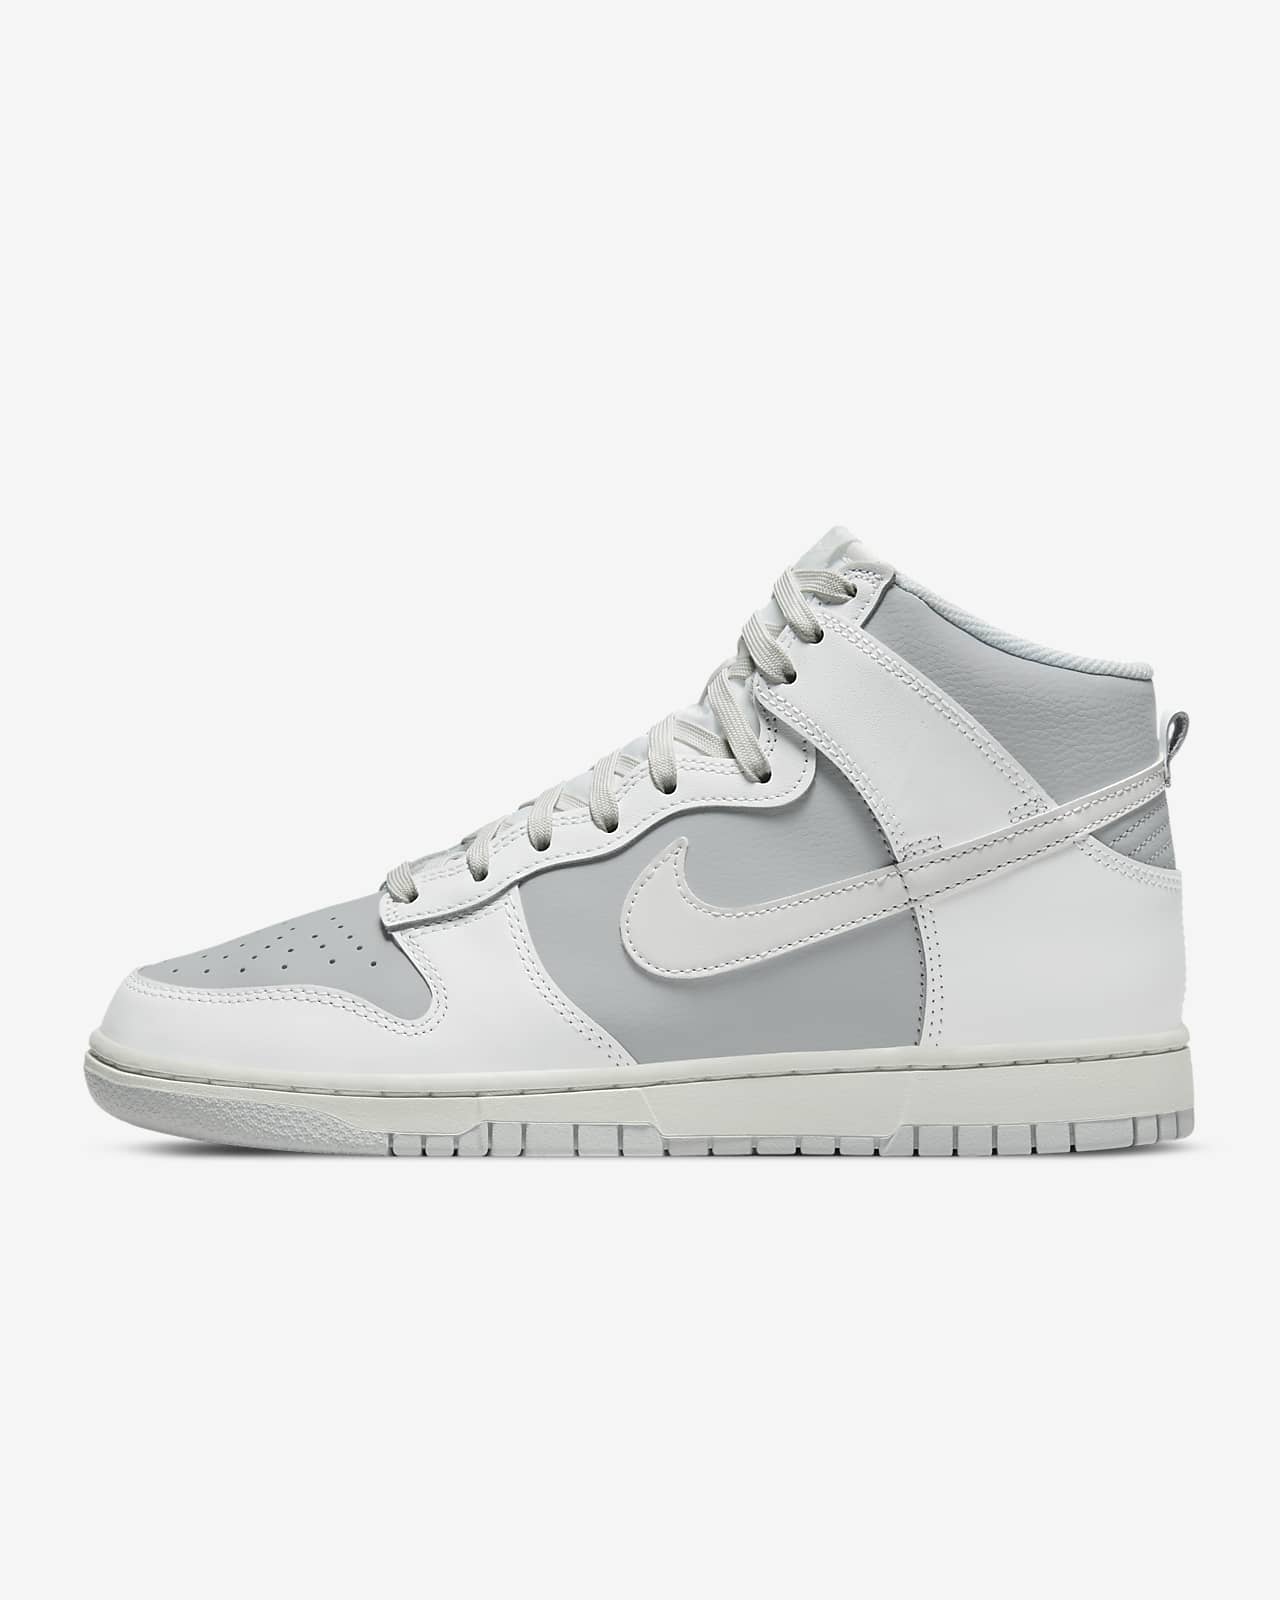 Chaussure Nike Dunk High Retro pour Homme